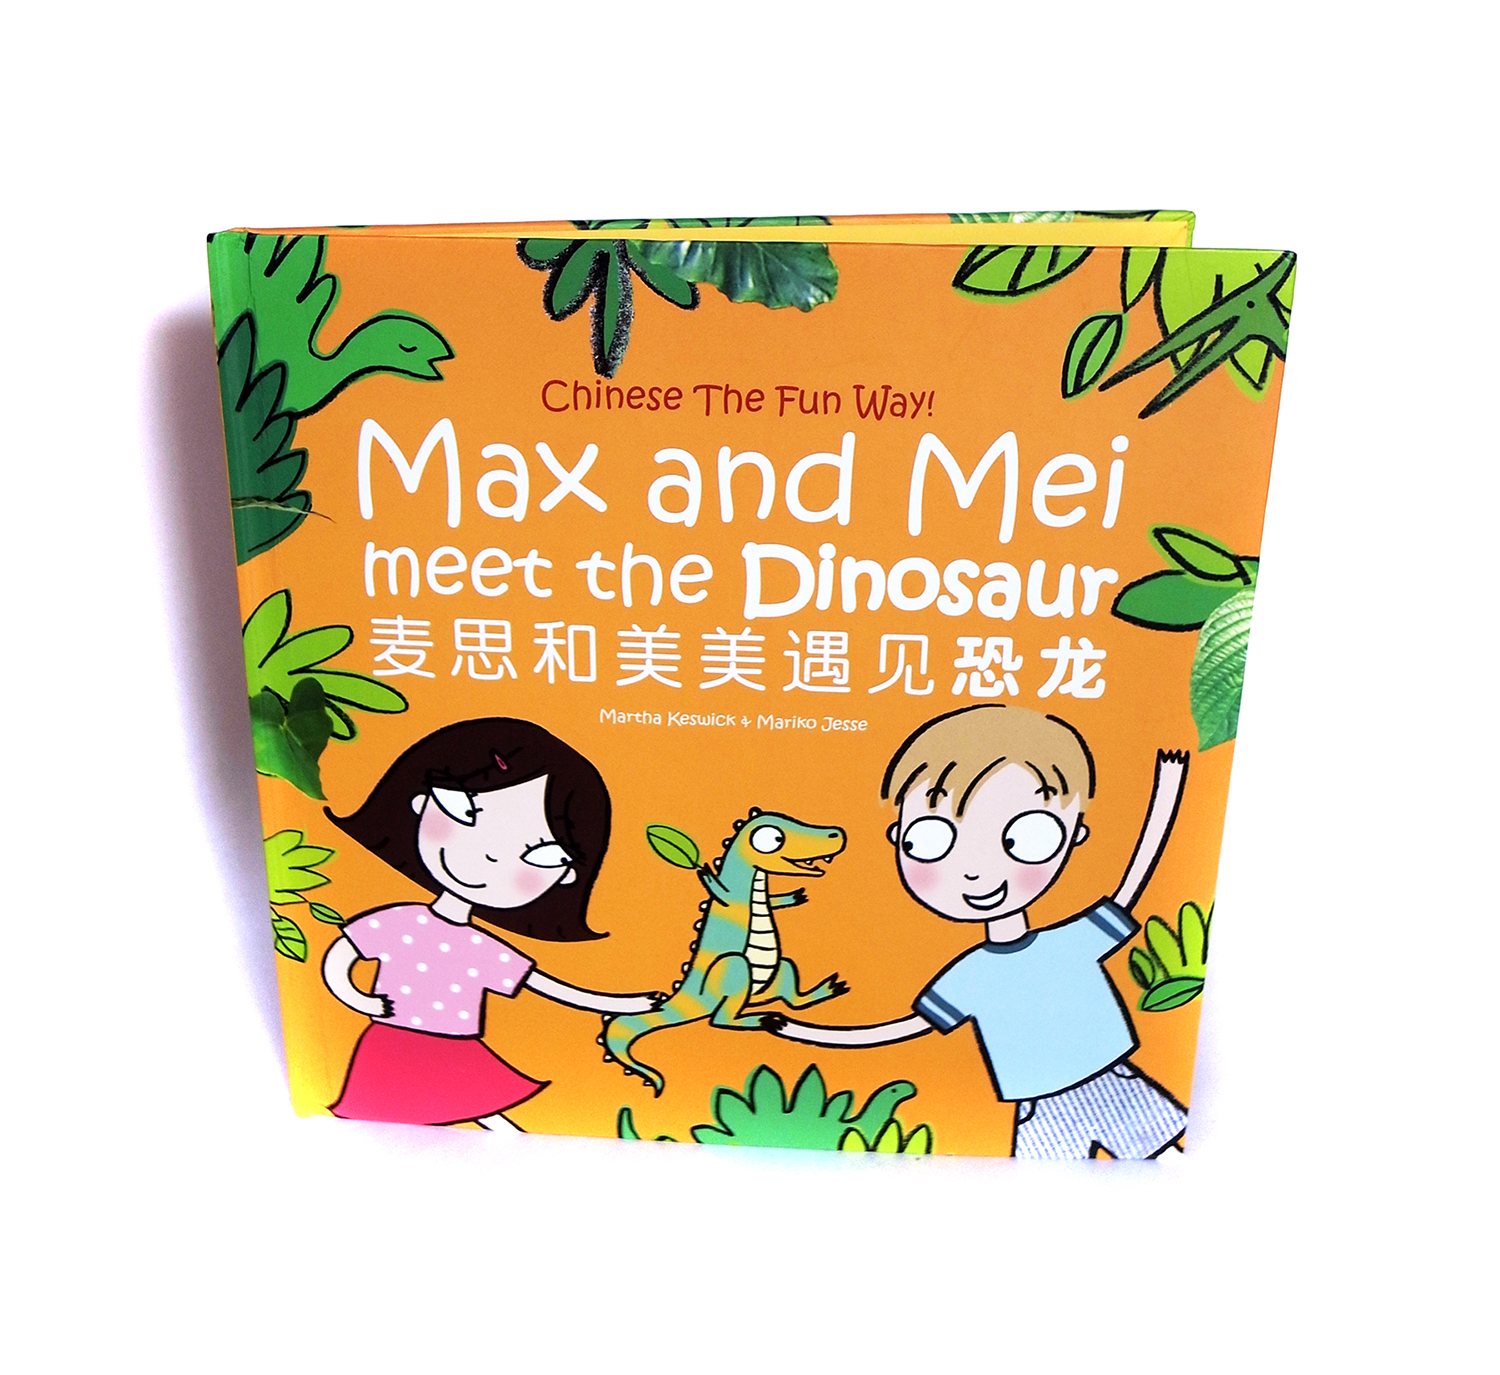 Max and Mei meet the Dinosaur